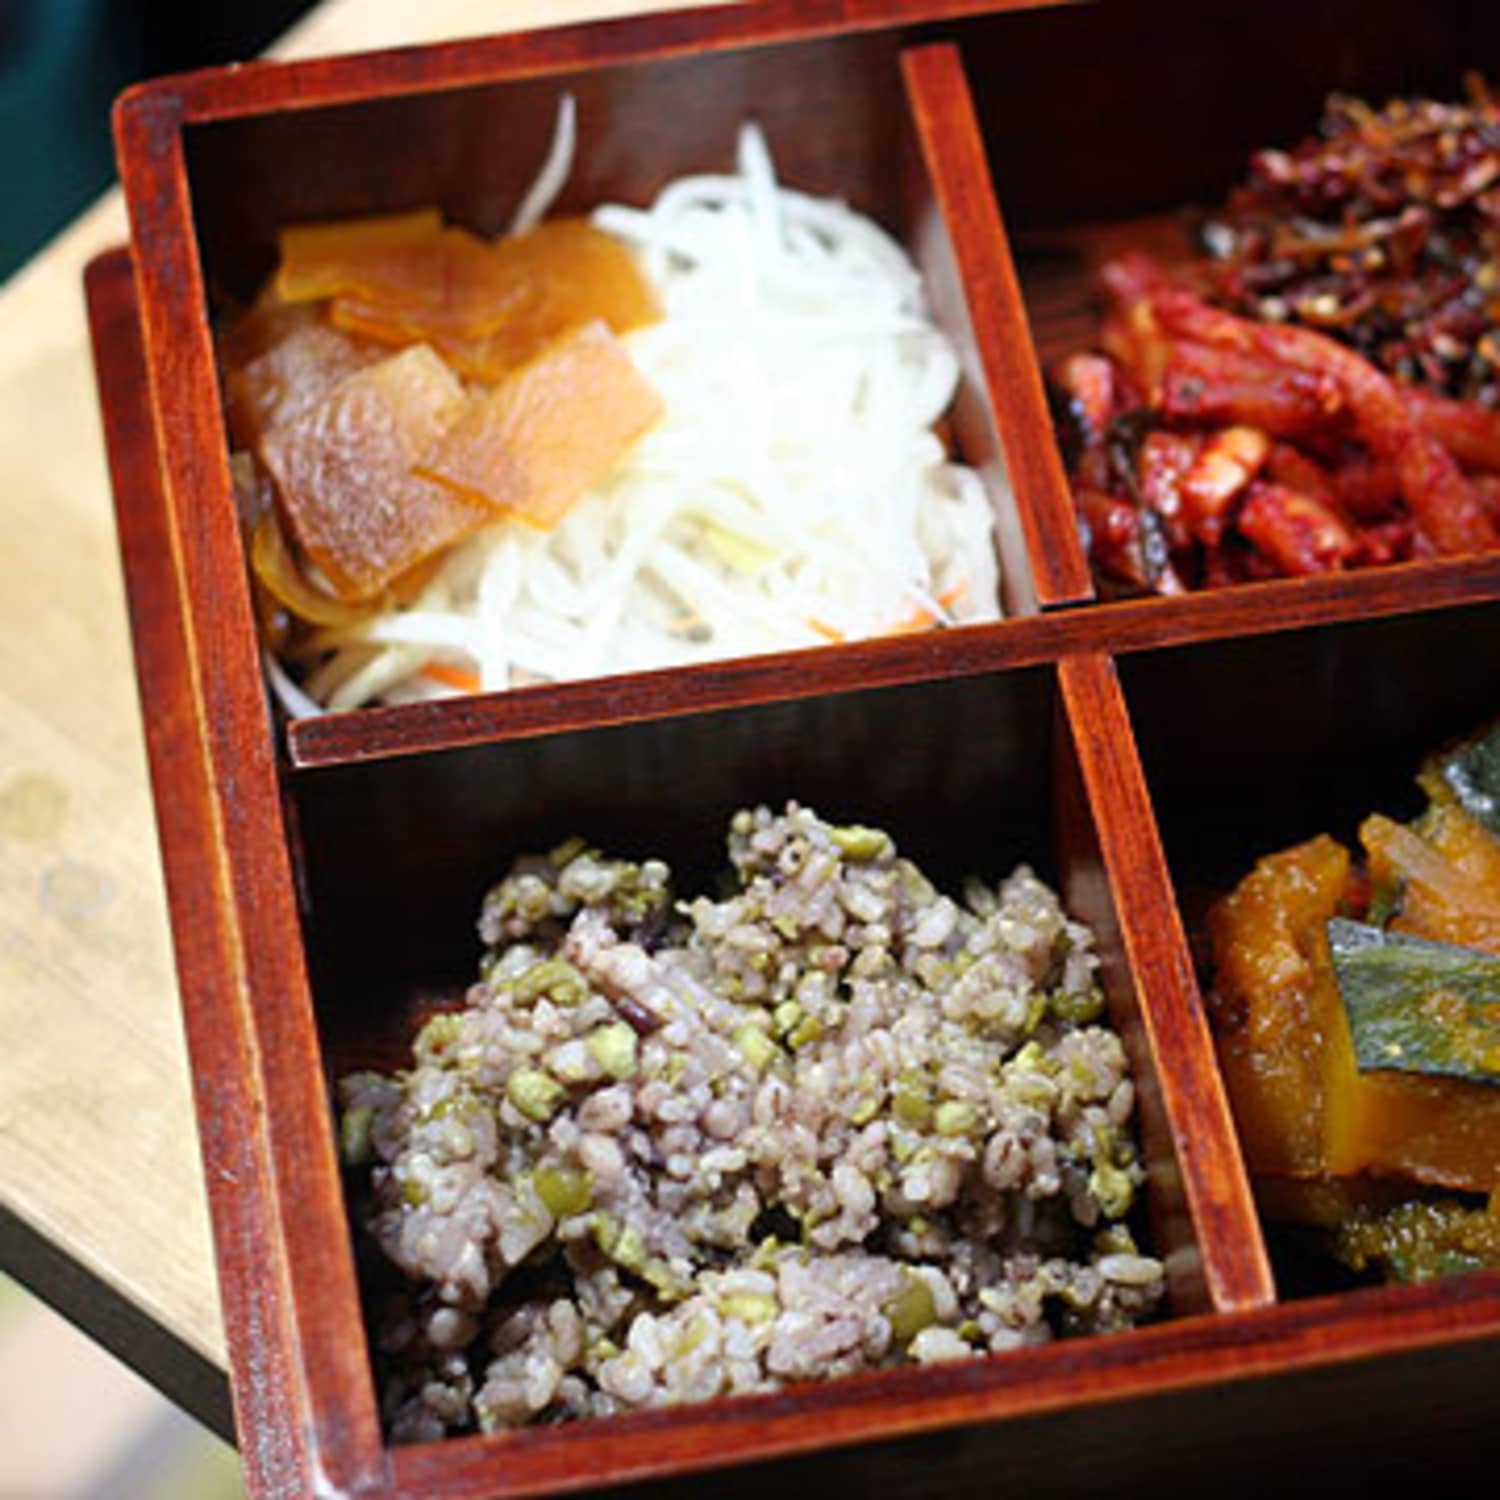 The controversial history of the bento box